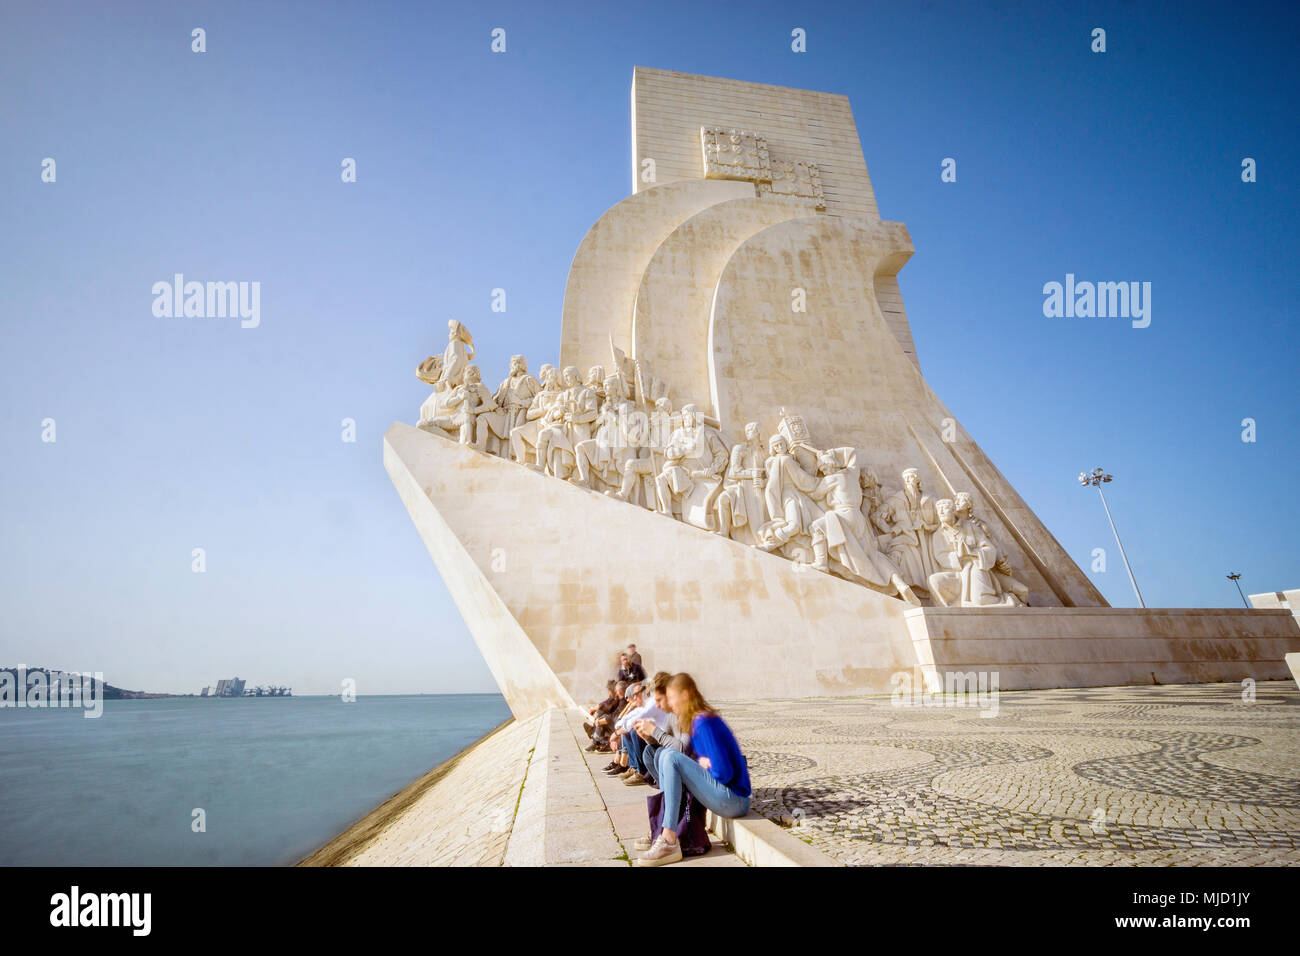 Tourists sitting next to Monument of the Discoveries in Belem, Lisbon, Portugal Stock Photo